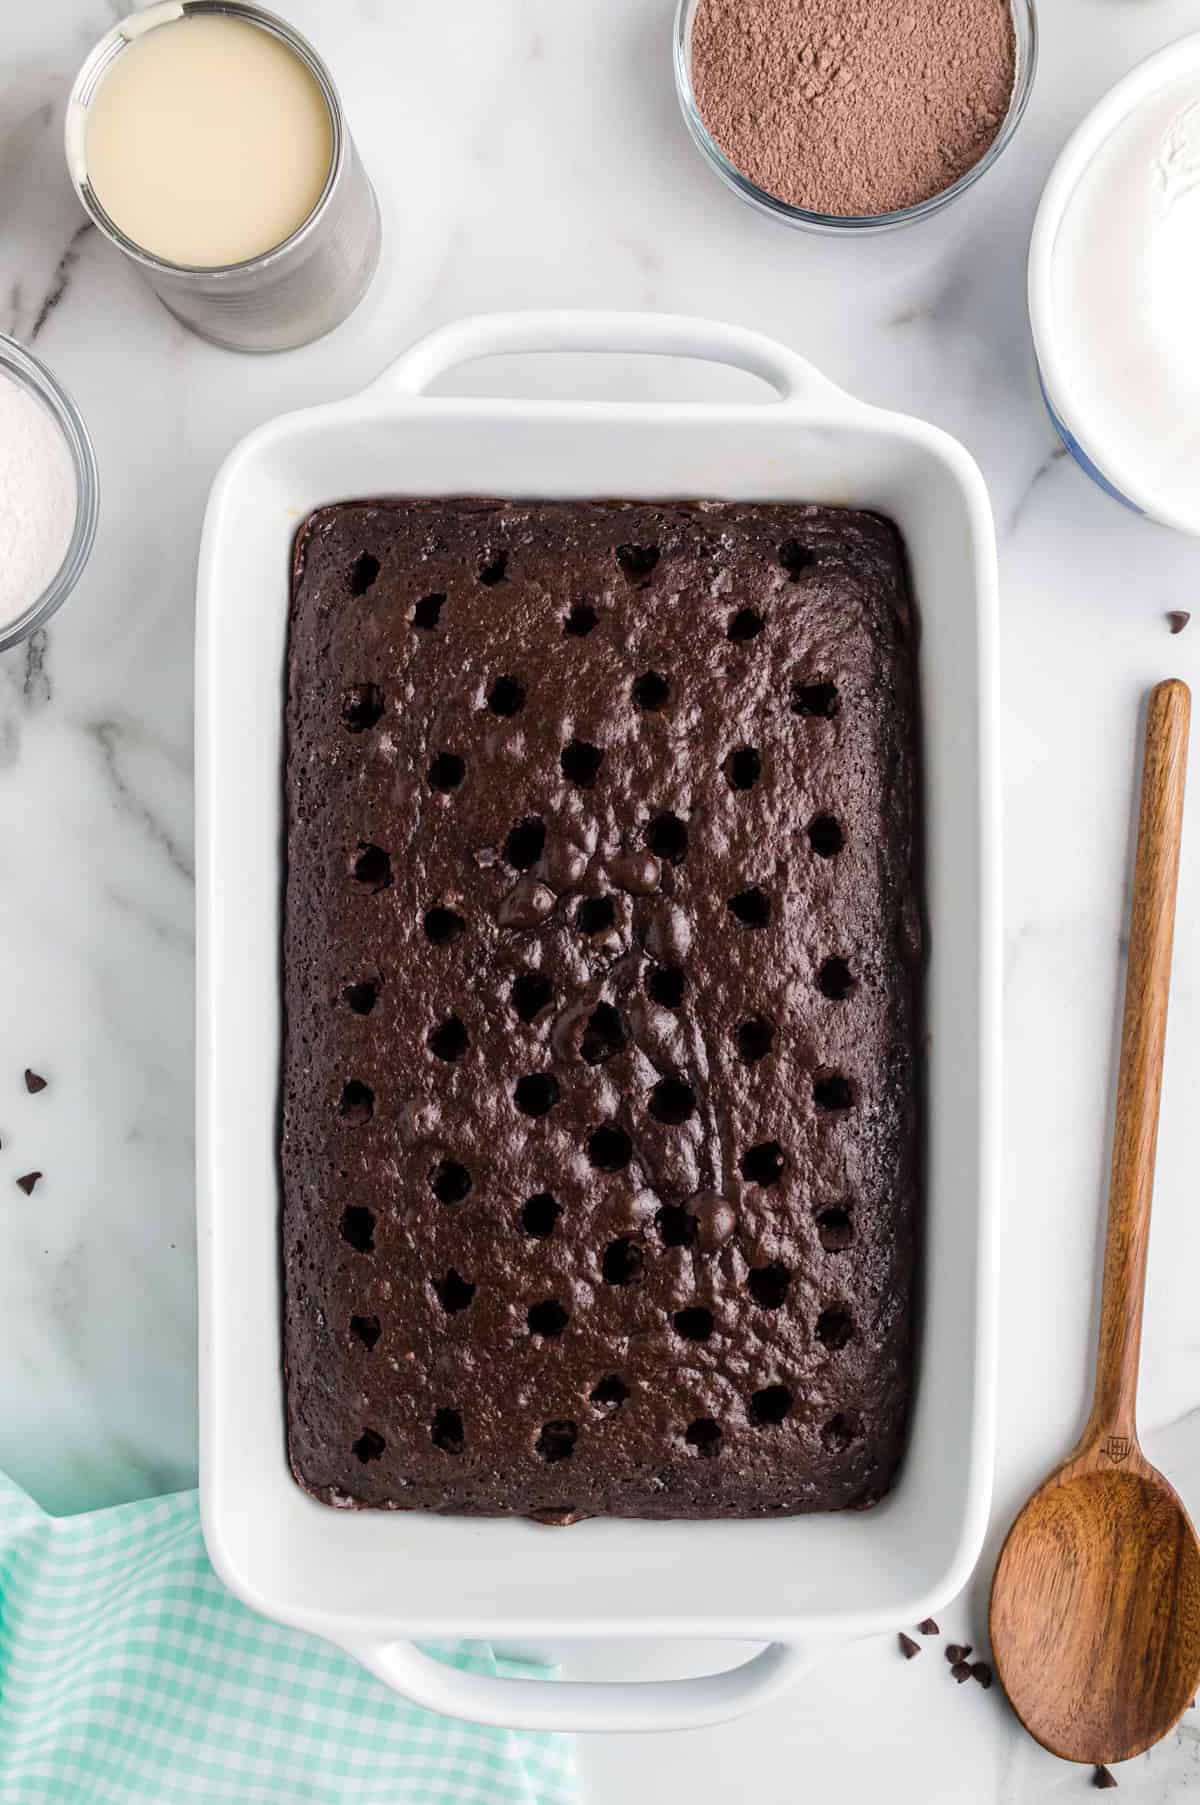 chocolate cake with holes poked in top with wooden spoon.